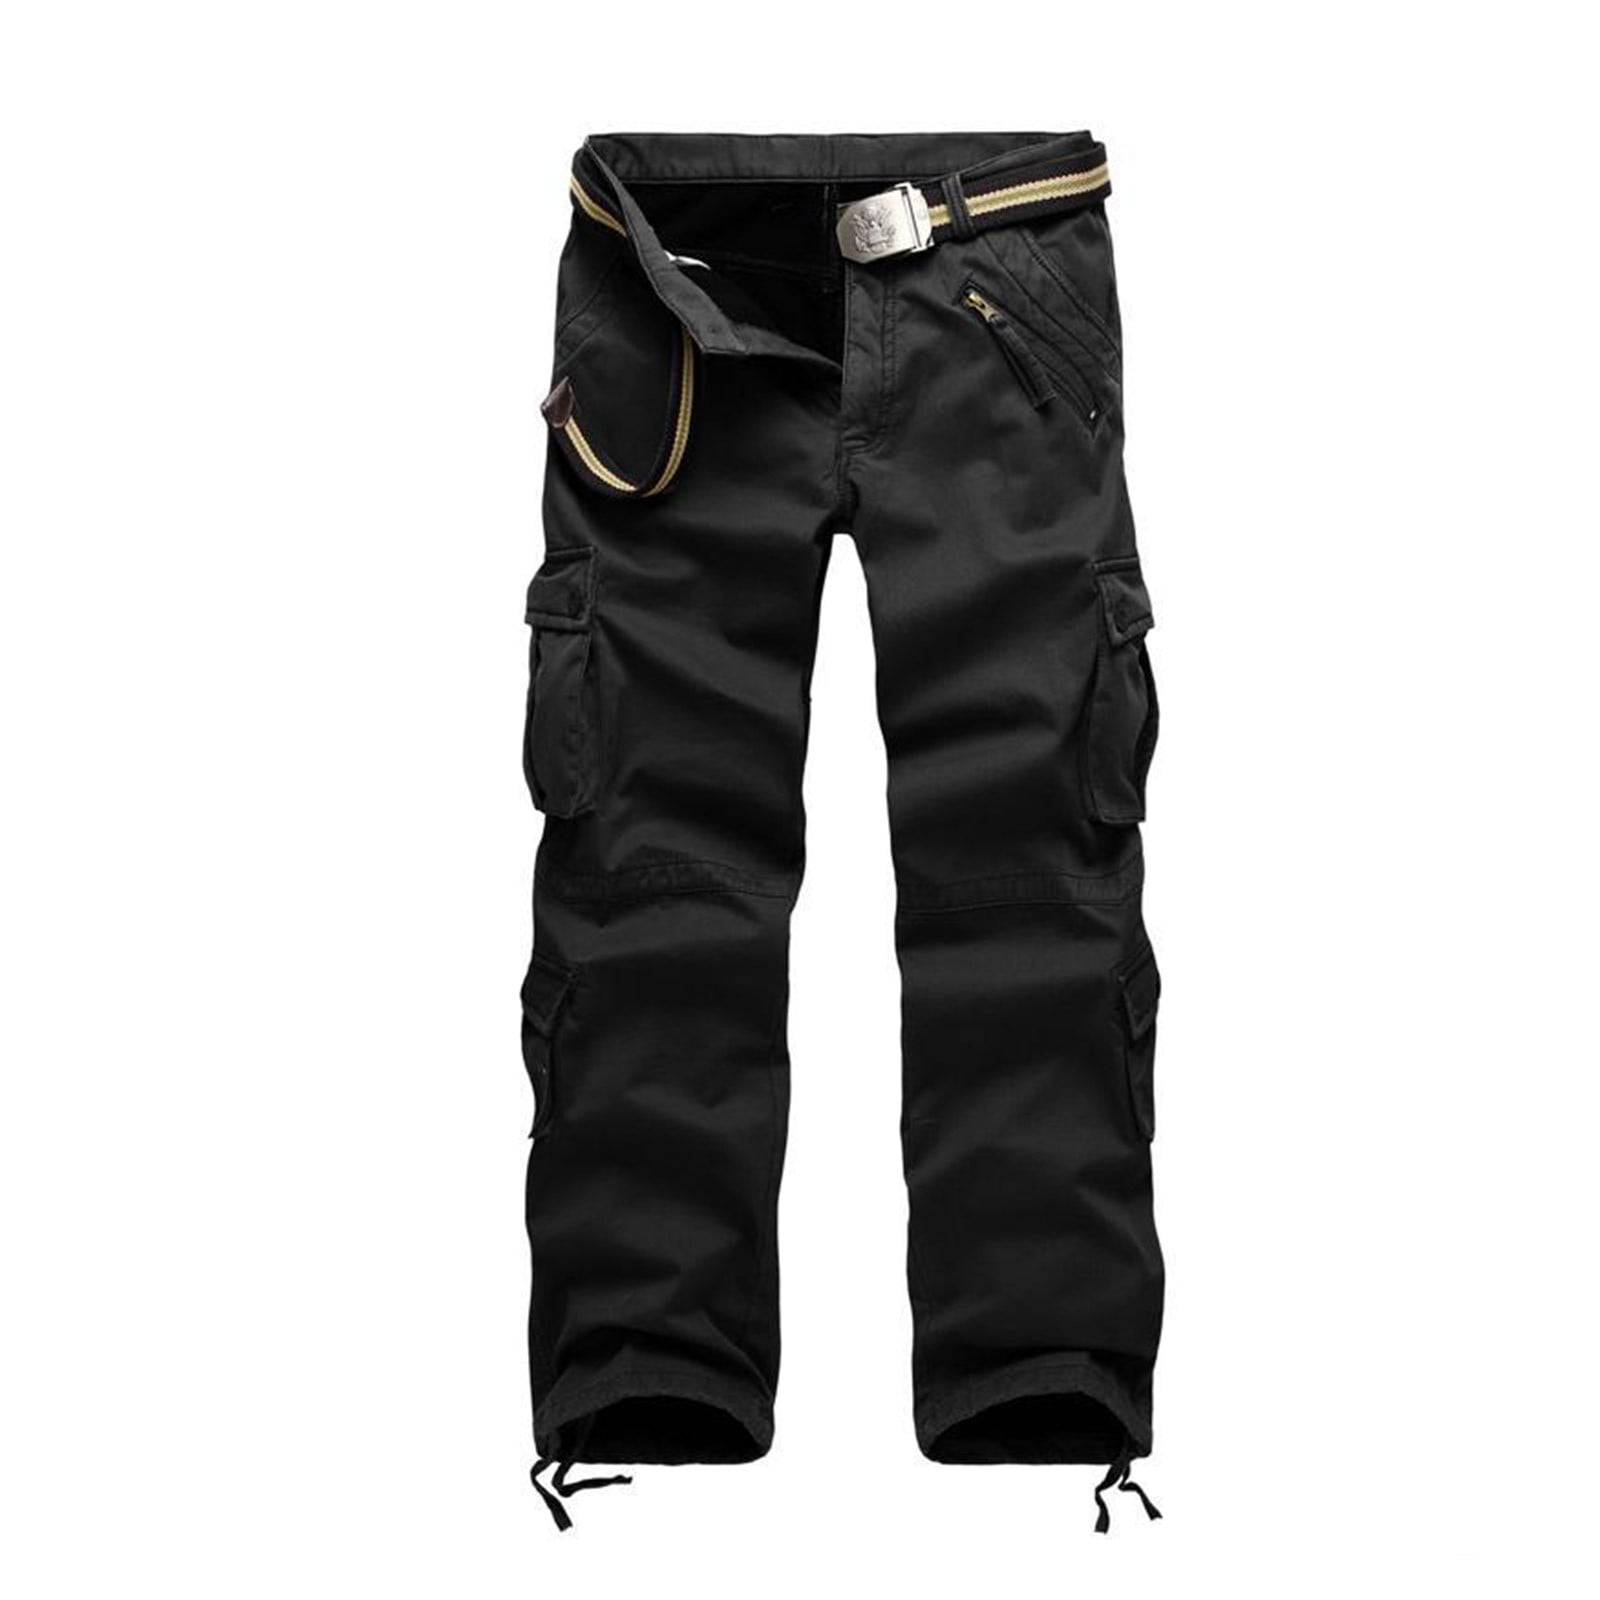 Men's Cotton Cargo Camo Combat Work Pants With 8 Pocket at Rs 799